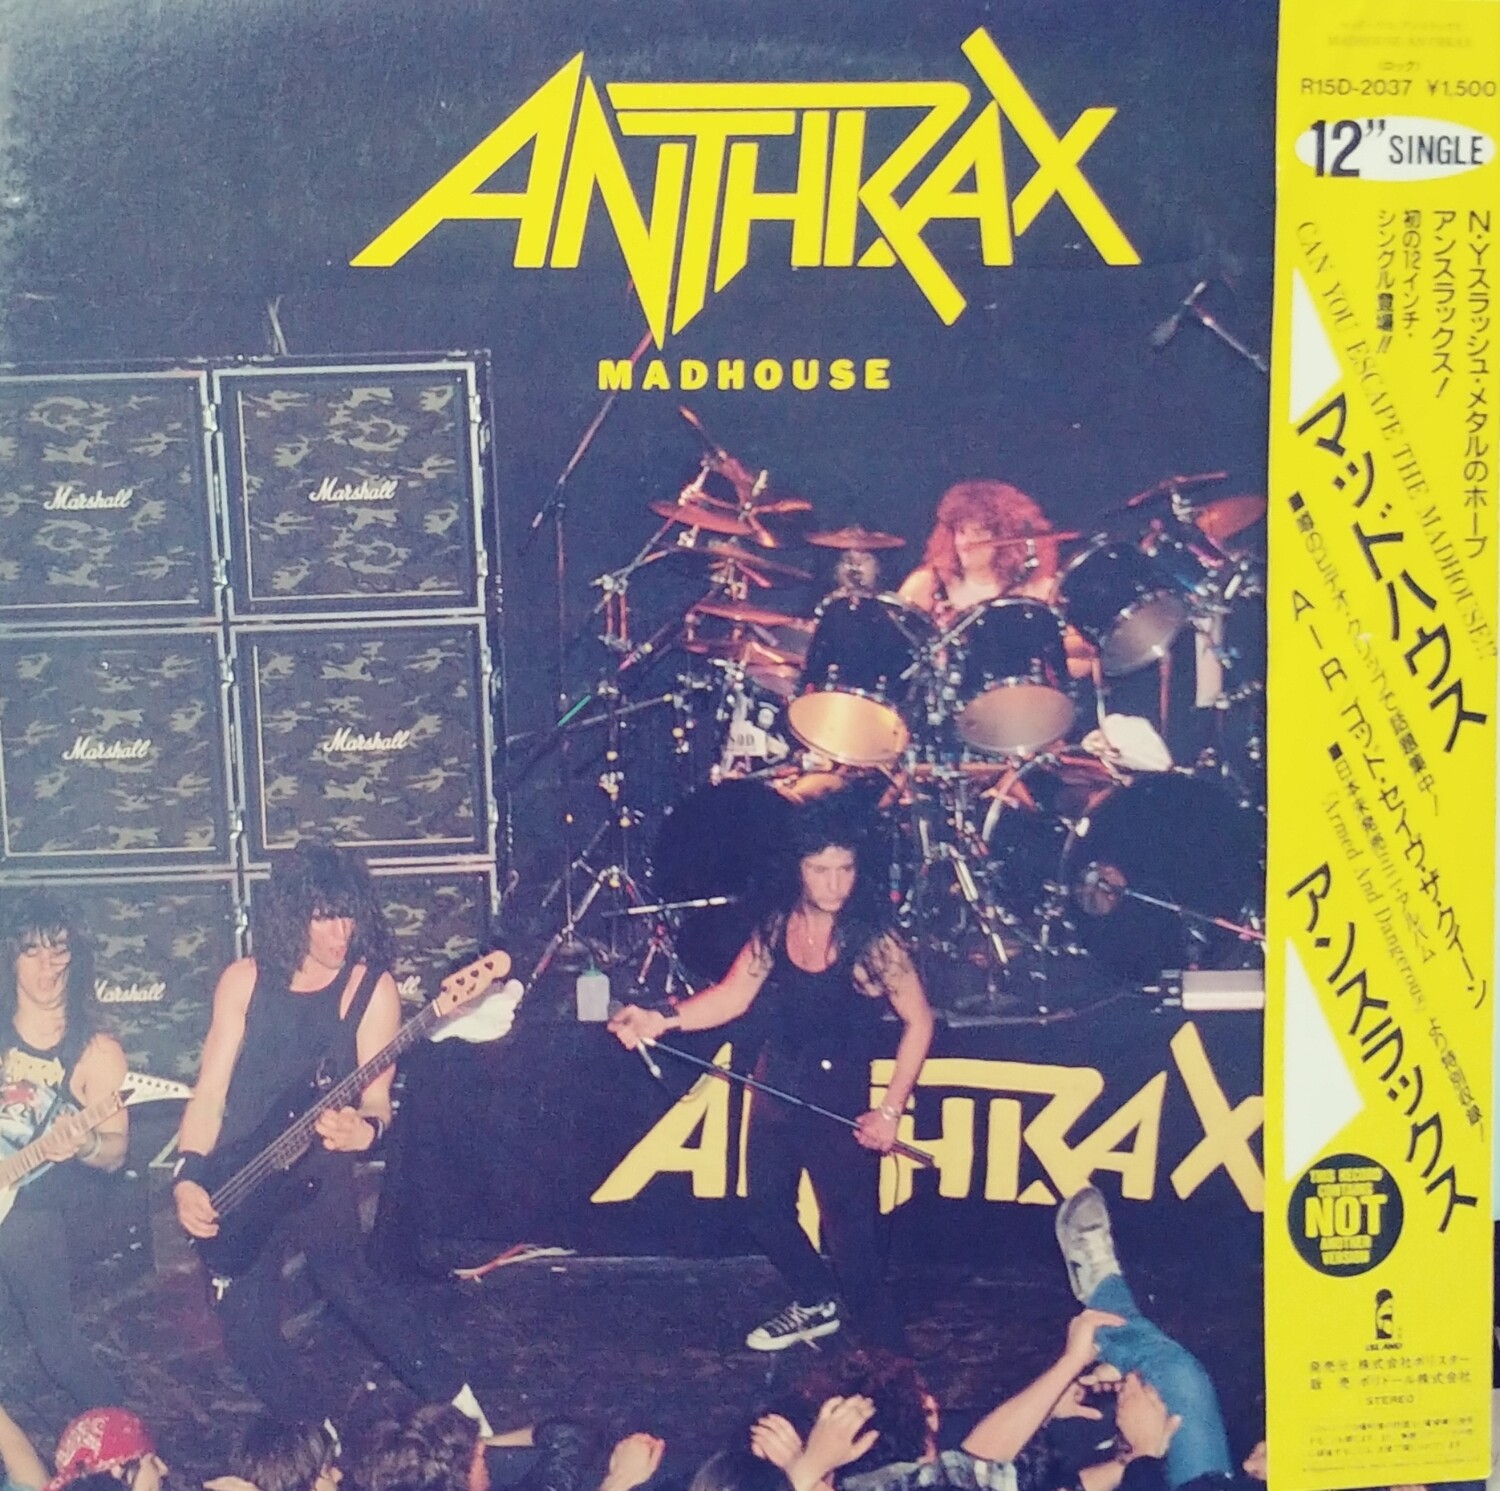 Anthrax - Madhouse / God save the Queen (JAPAN)